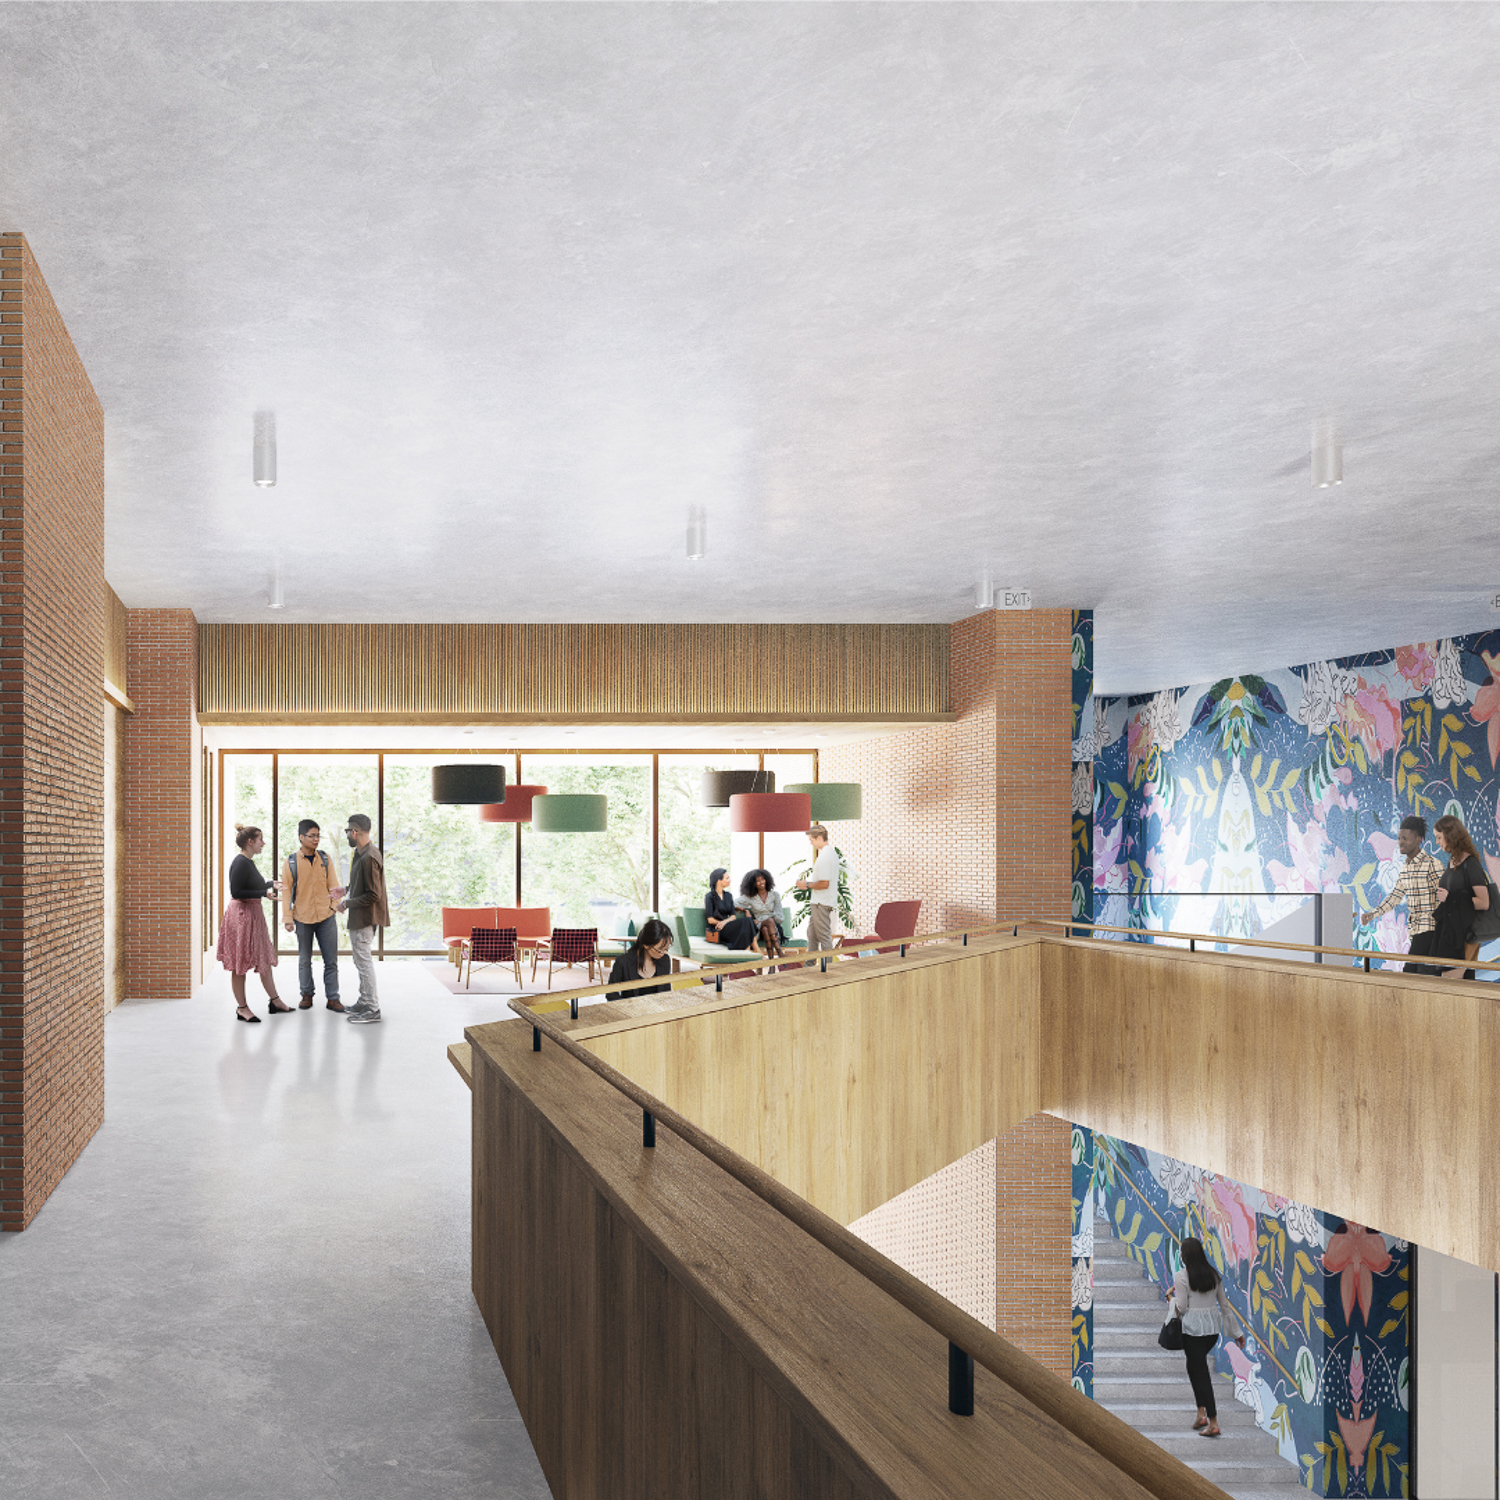 300 Aggie Square interior, rendering by ZGF Architects